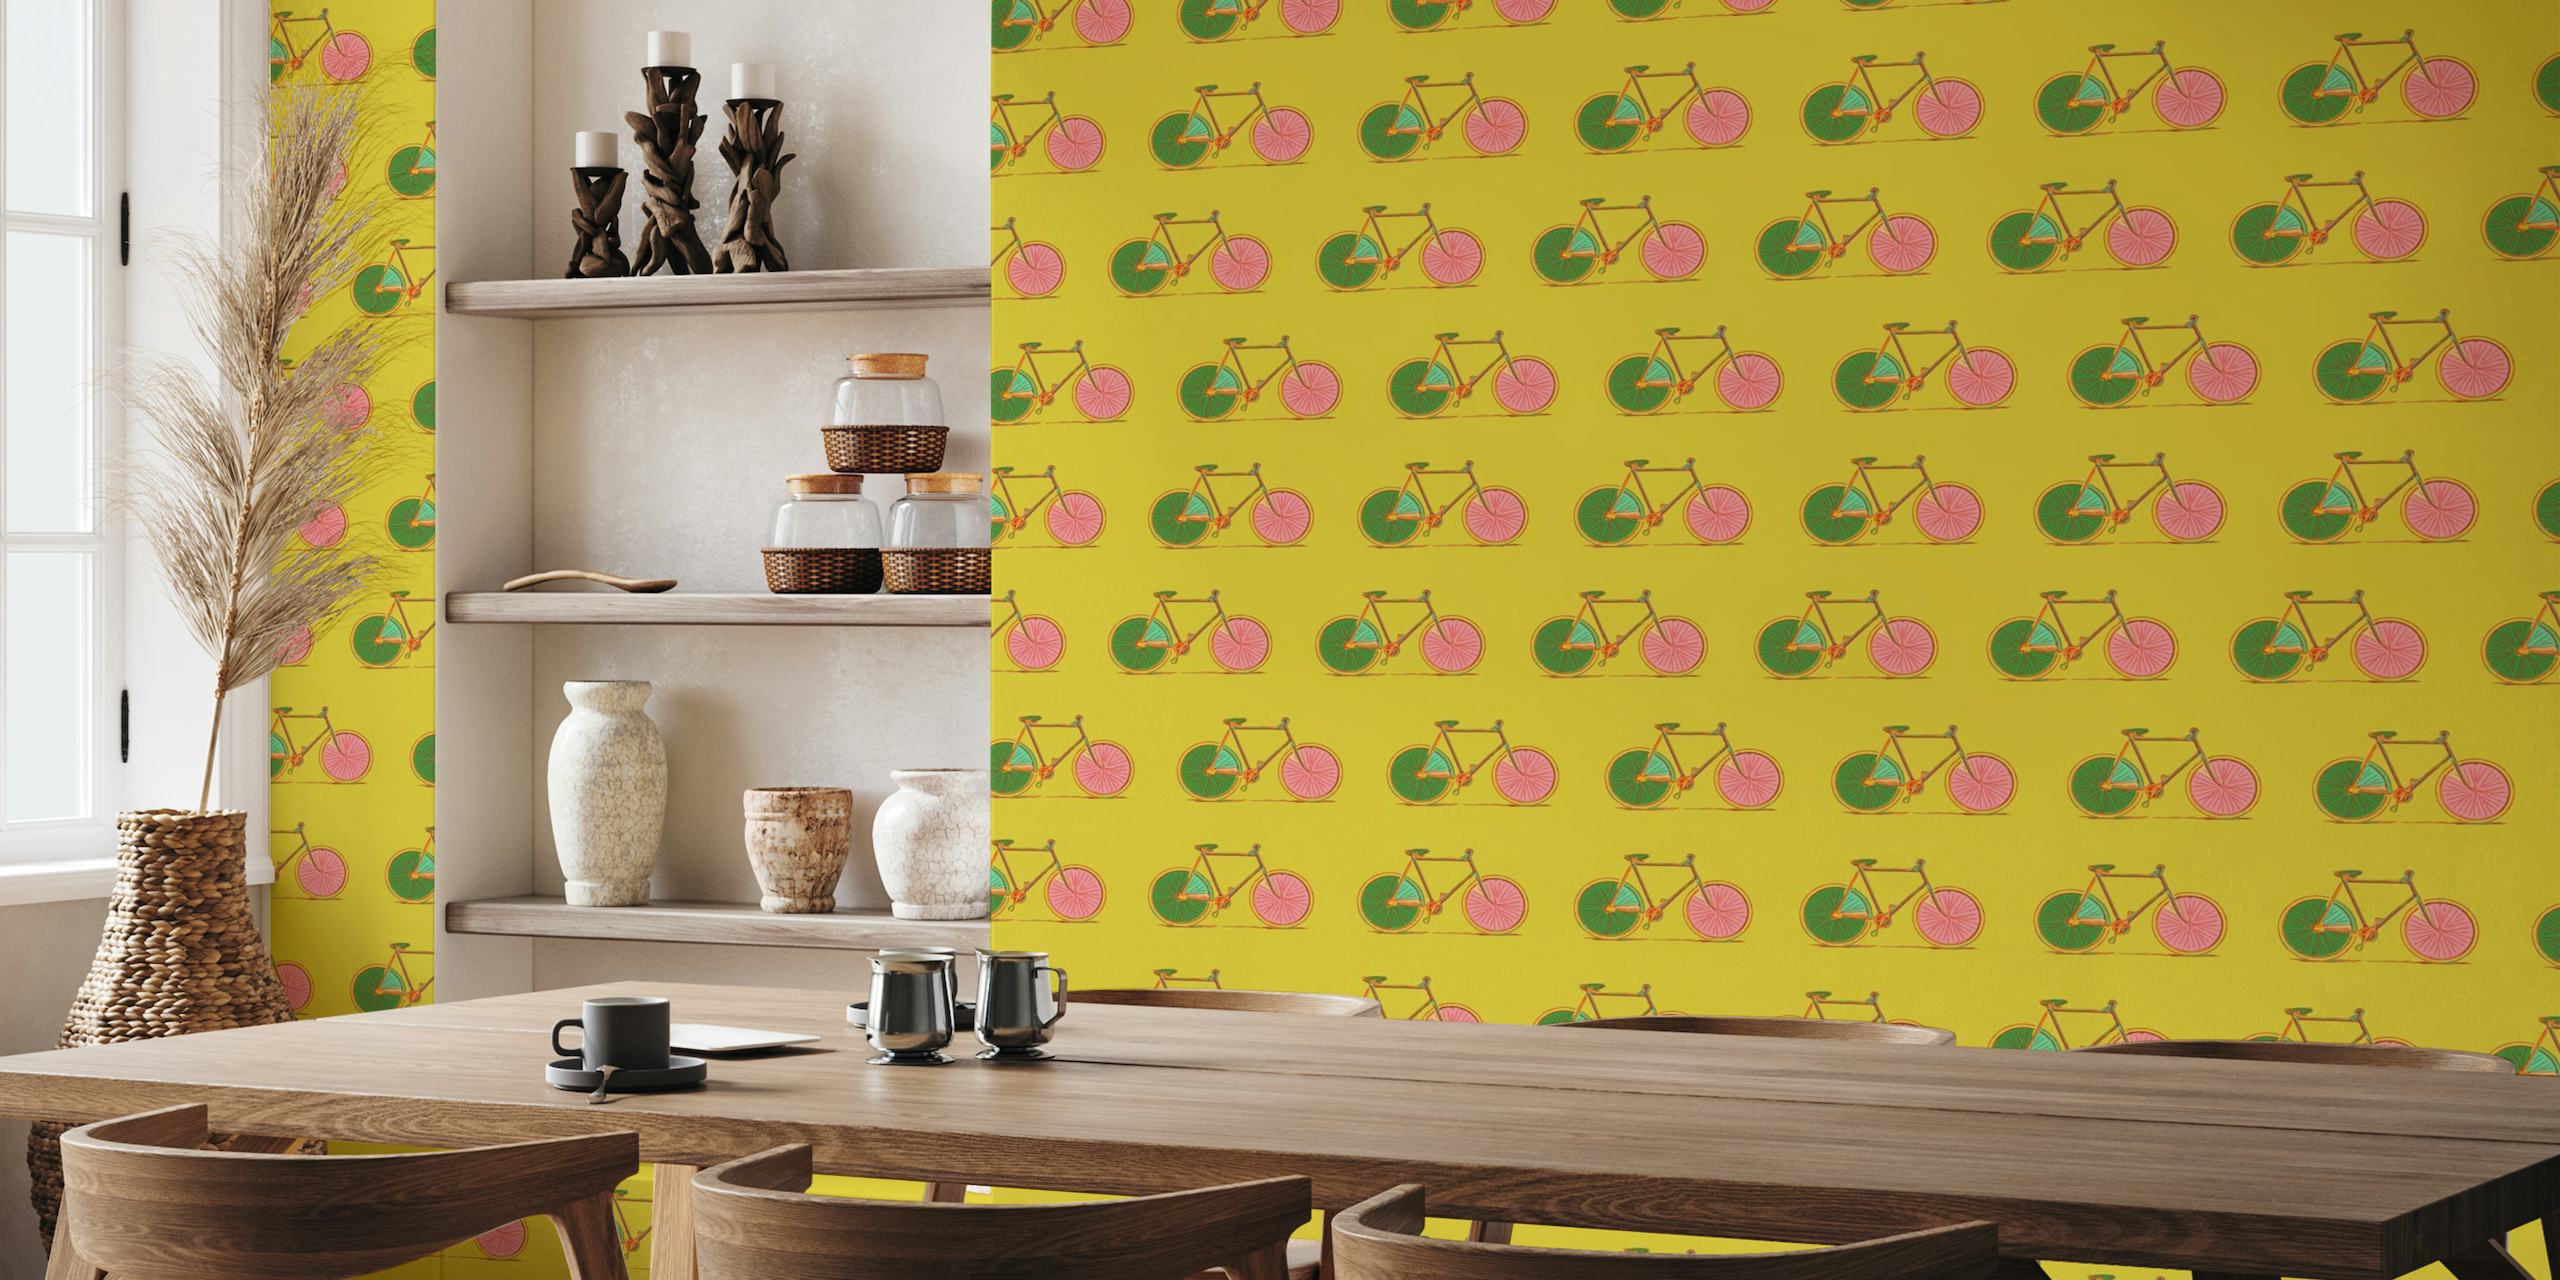 Lime yellow wall mural with a pattern of bicycles